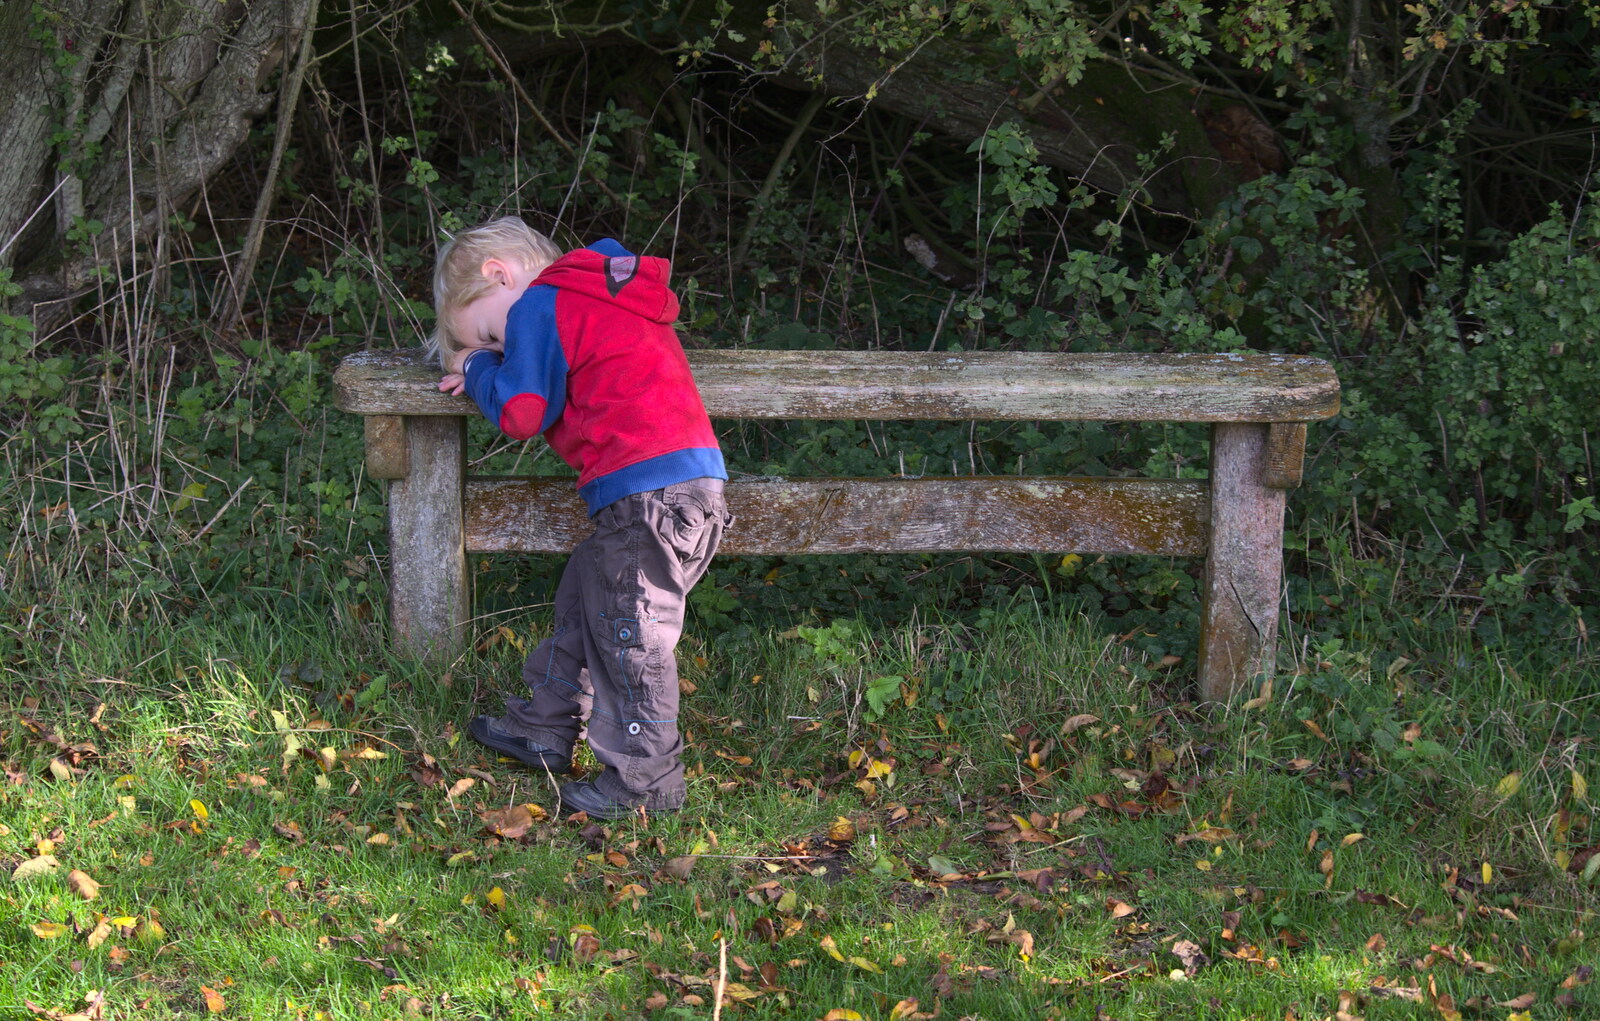 Harry leans on a bench from Another Walk around Thornham Estate, Suffolk - 27th October 2014